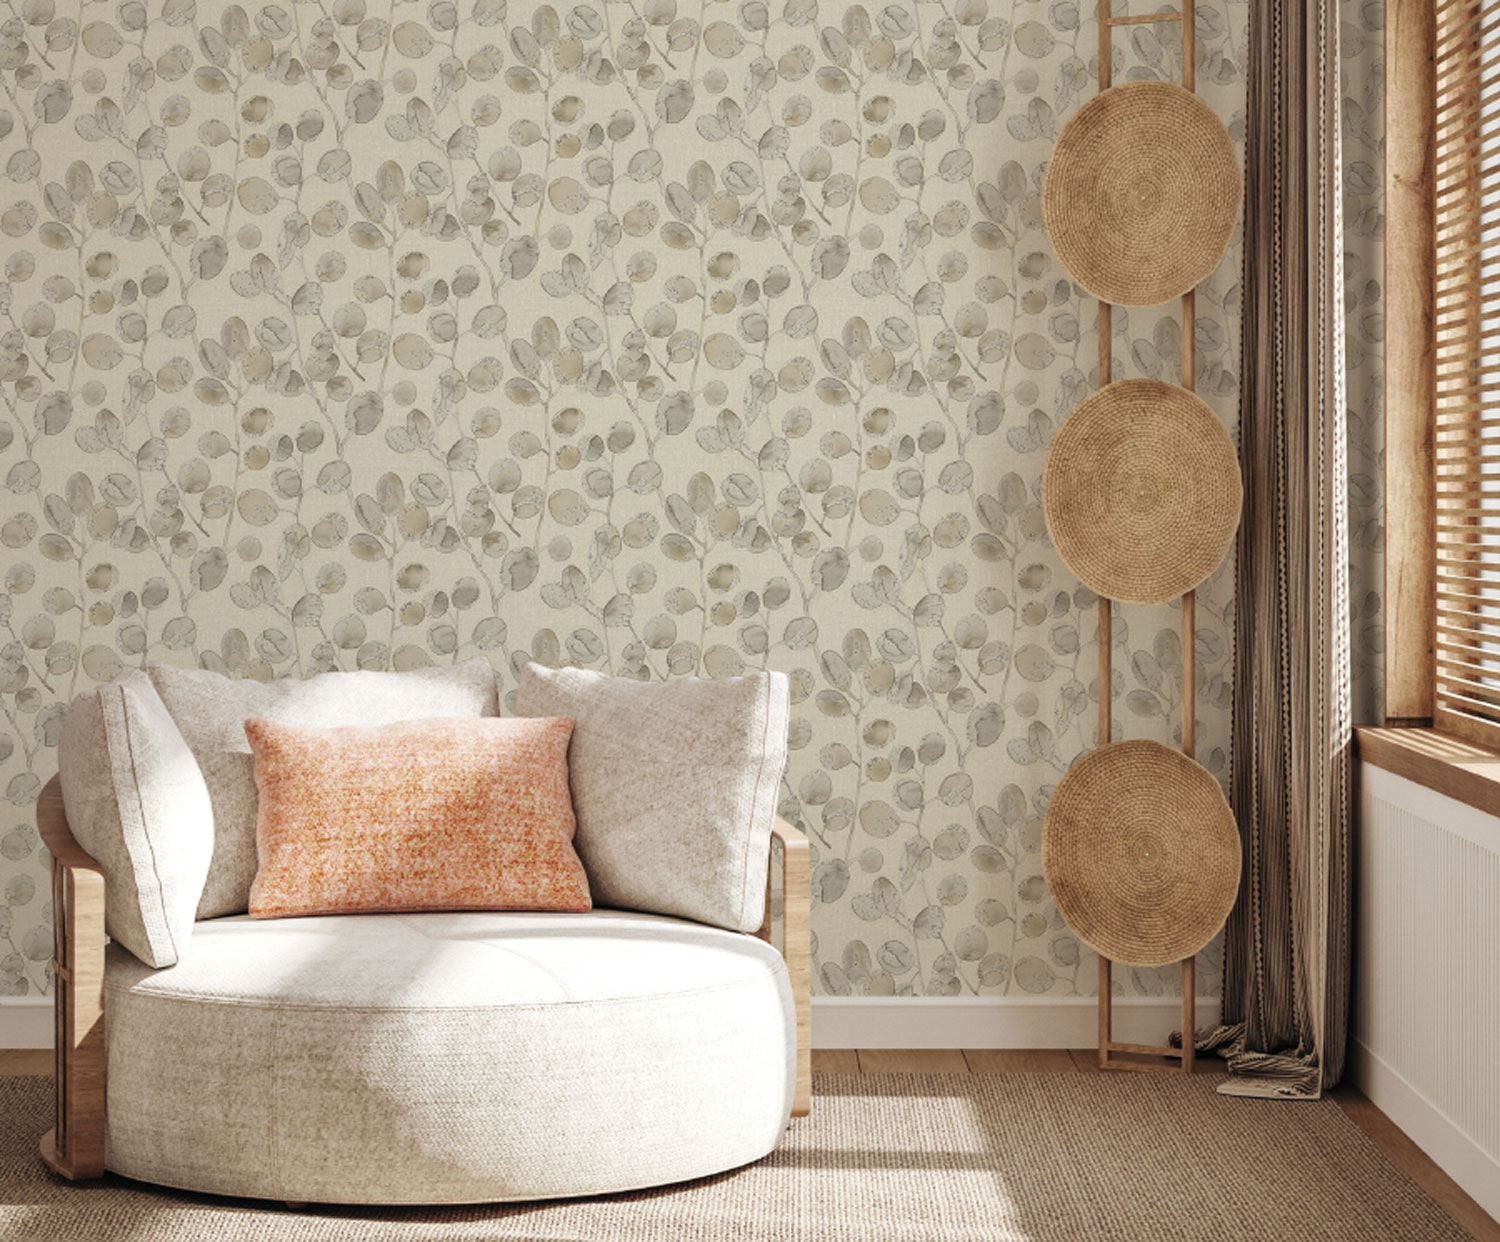 Choosing colors and patterns of wallpapers can transform the atmosphere and style of the room, including combining various decorations.